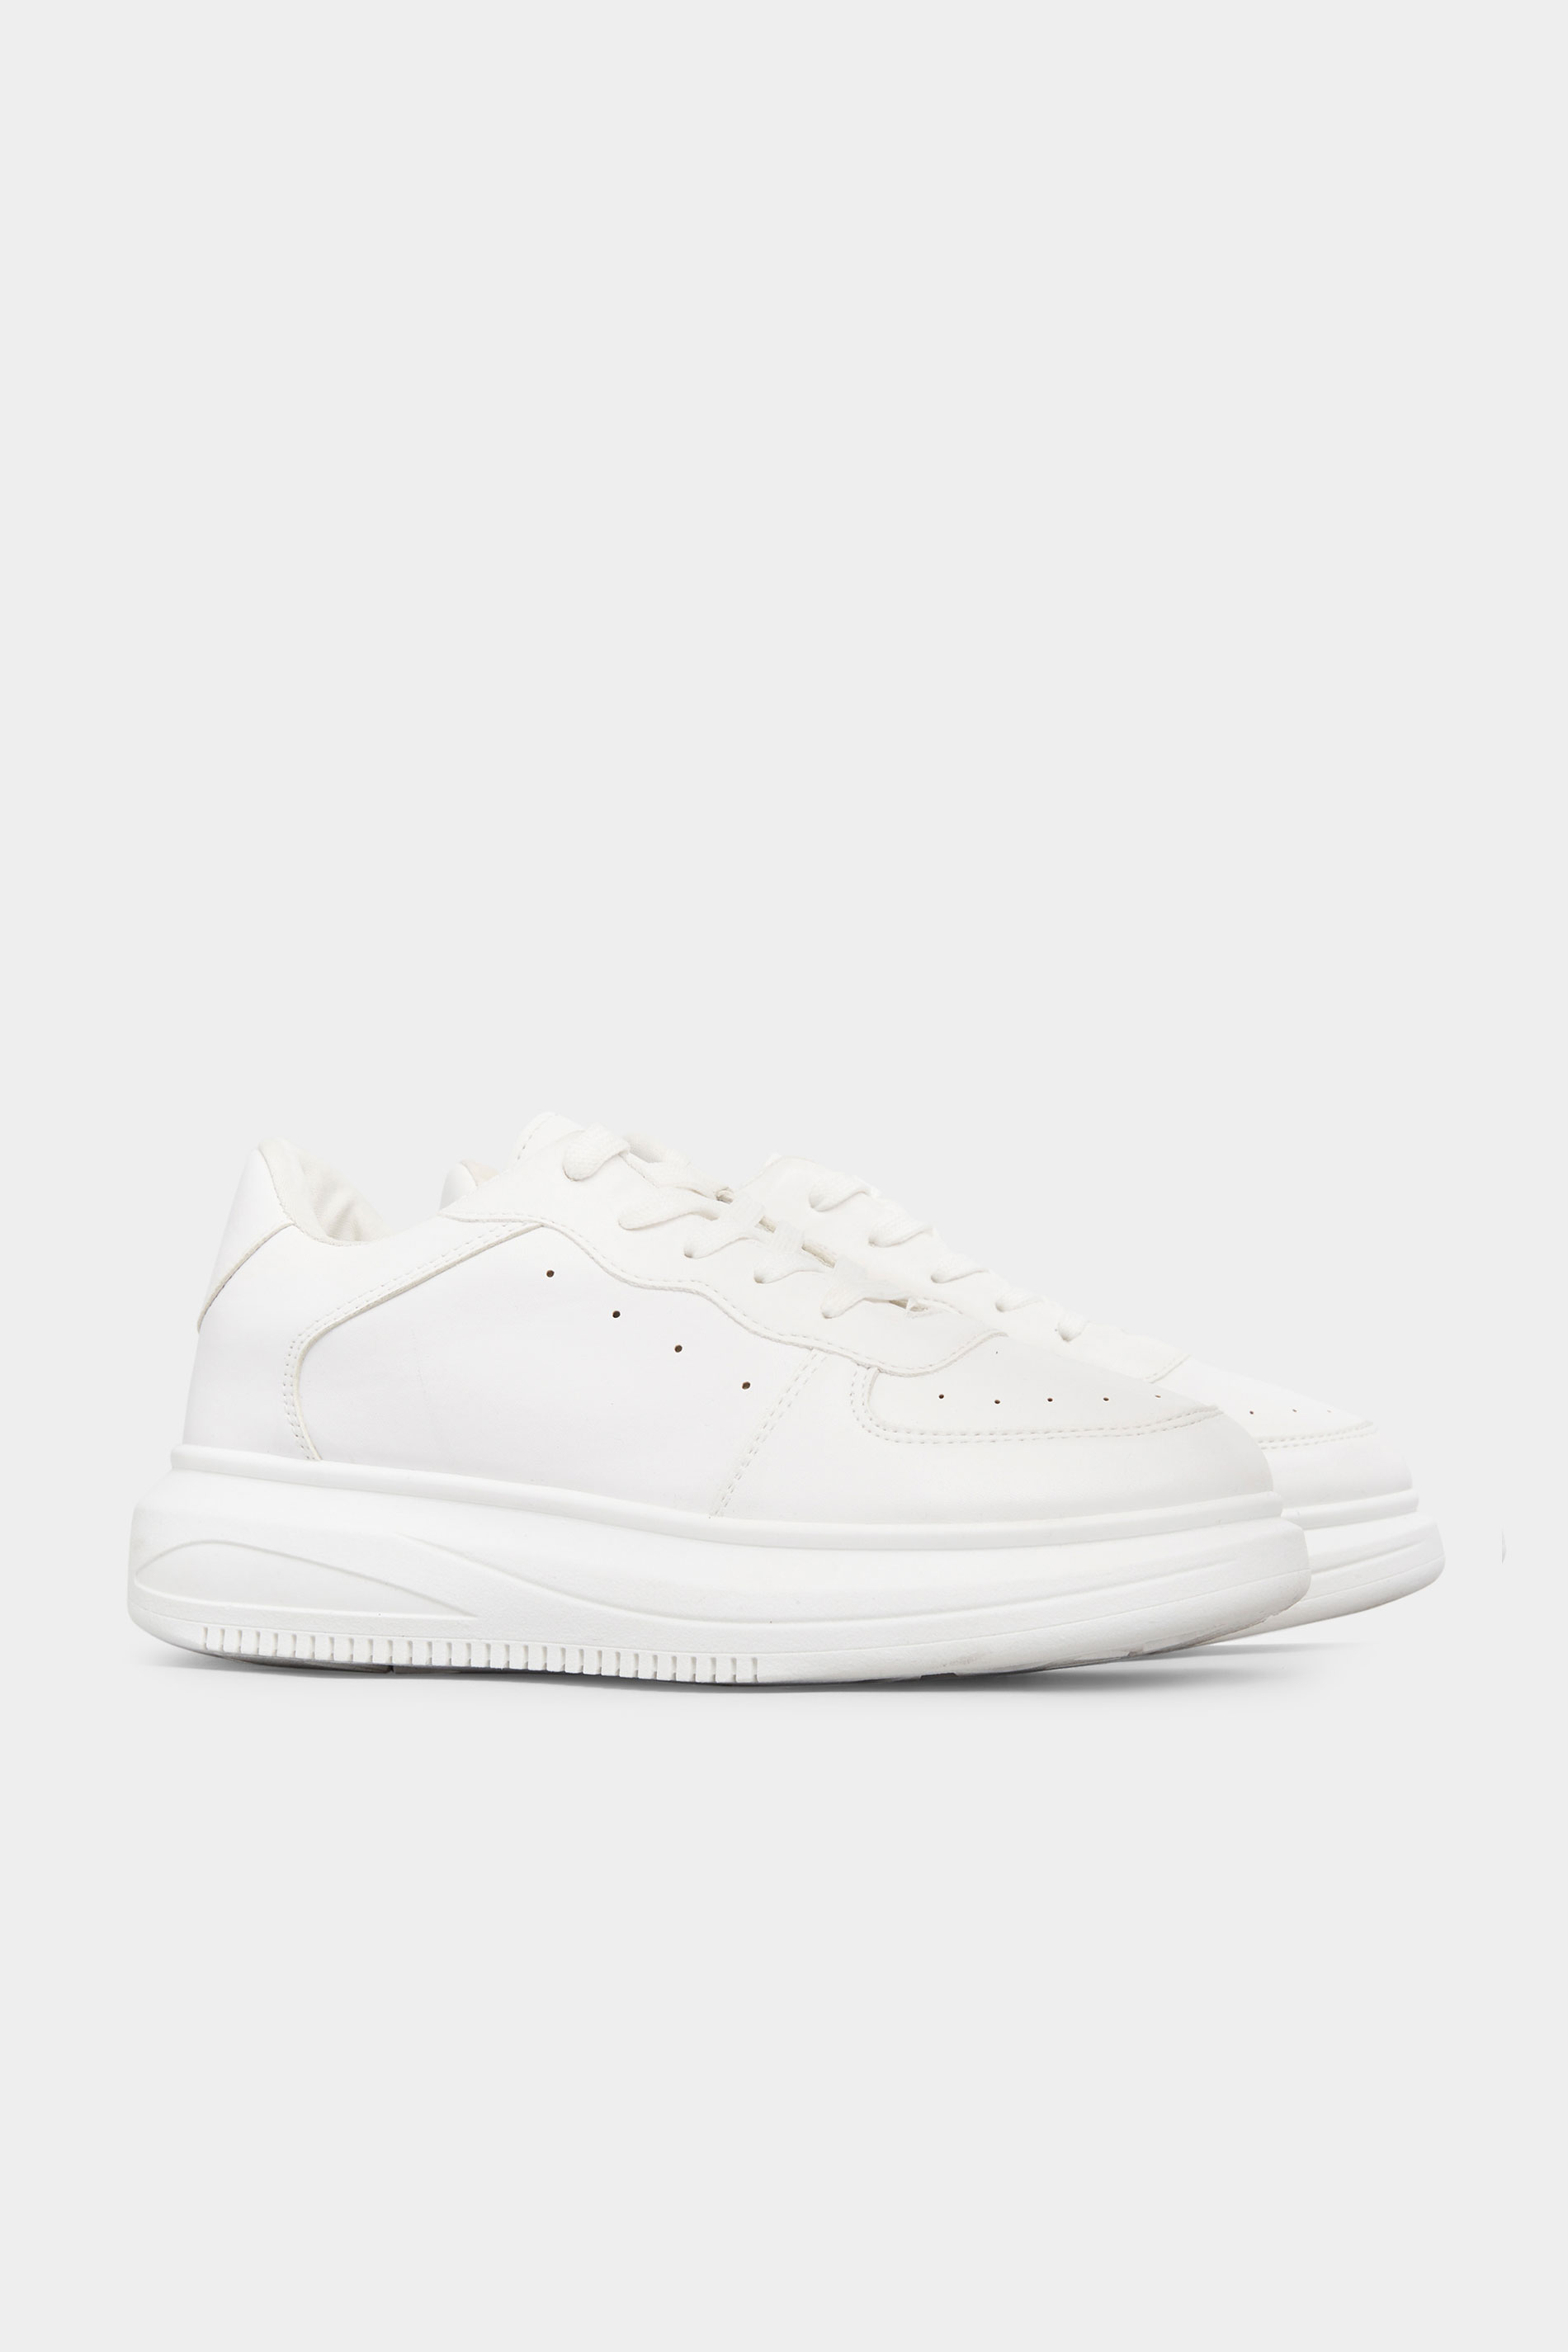 LIMITED COLLECTION White Platform Chunky Vegan Leather Trainers In Regular Fit_B.jpg